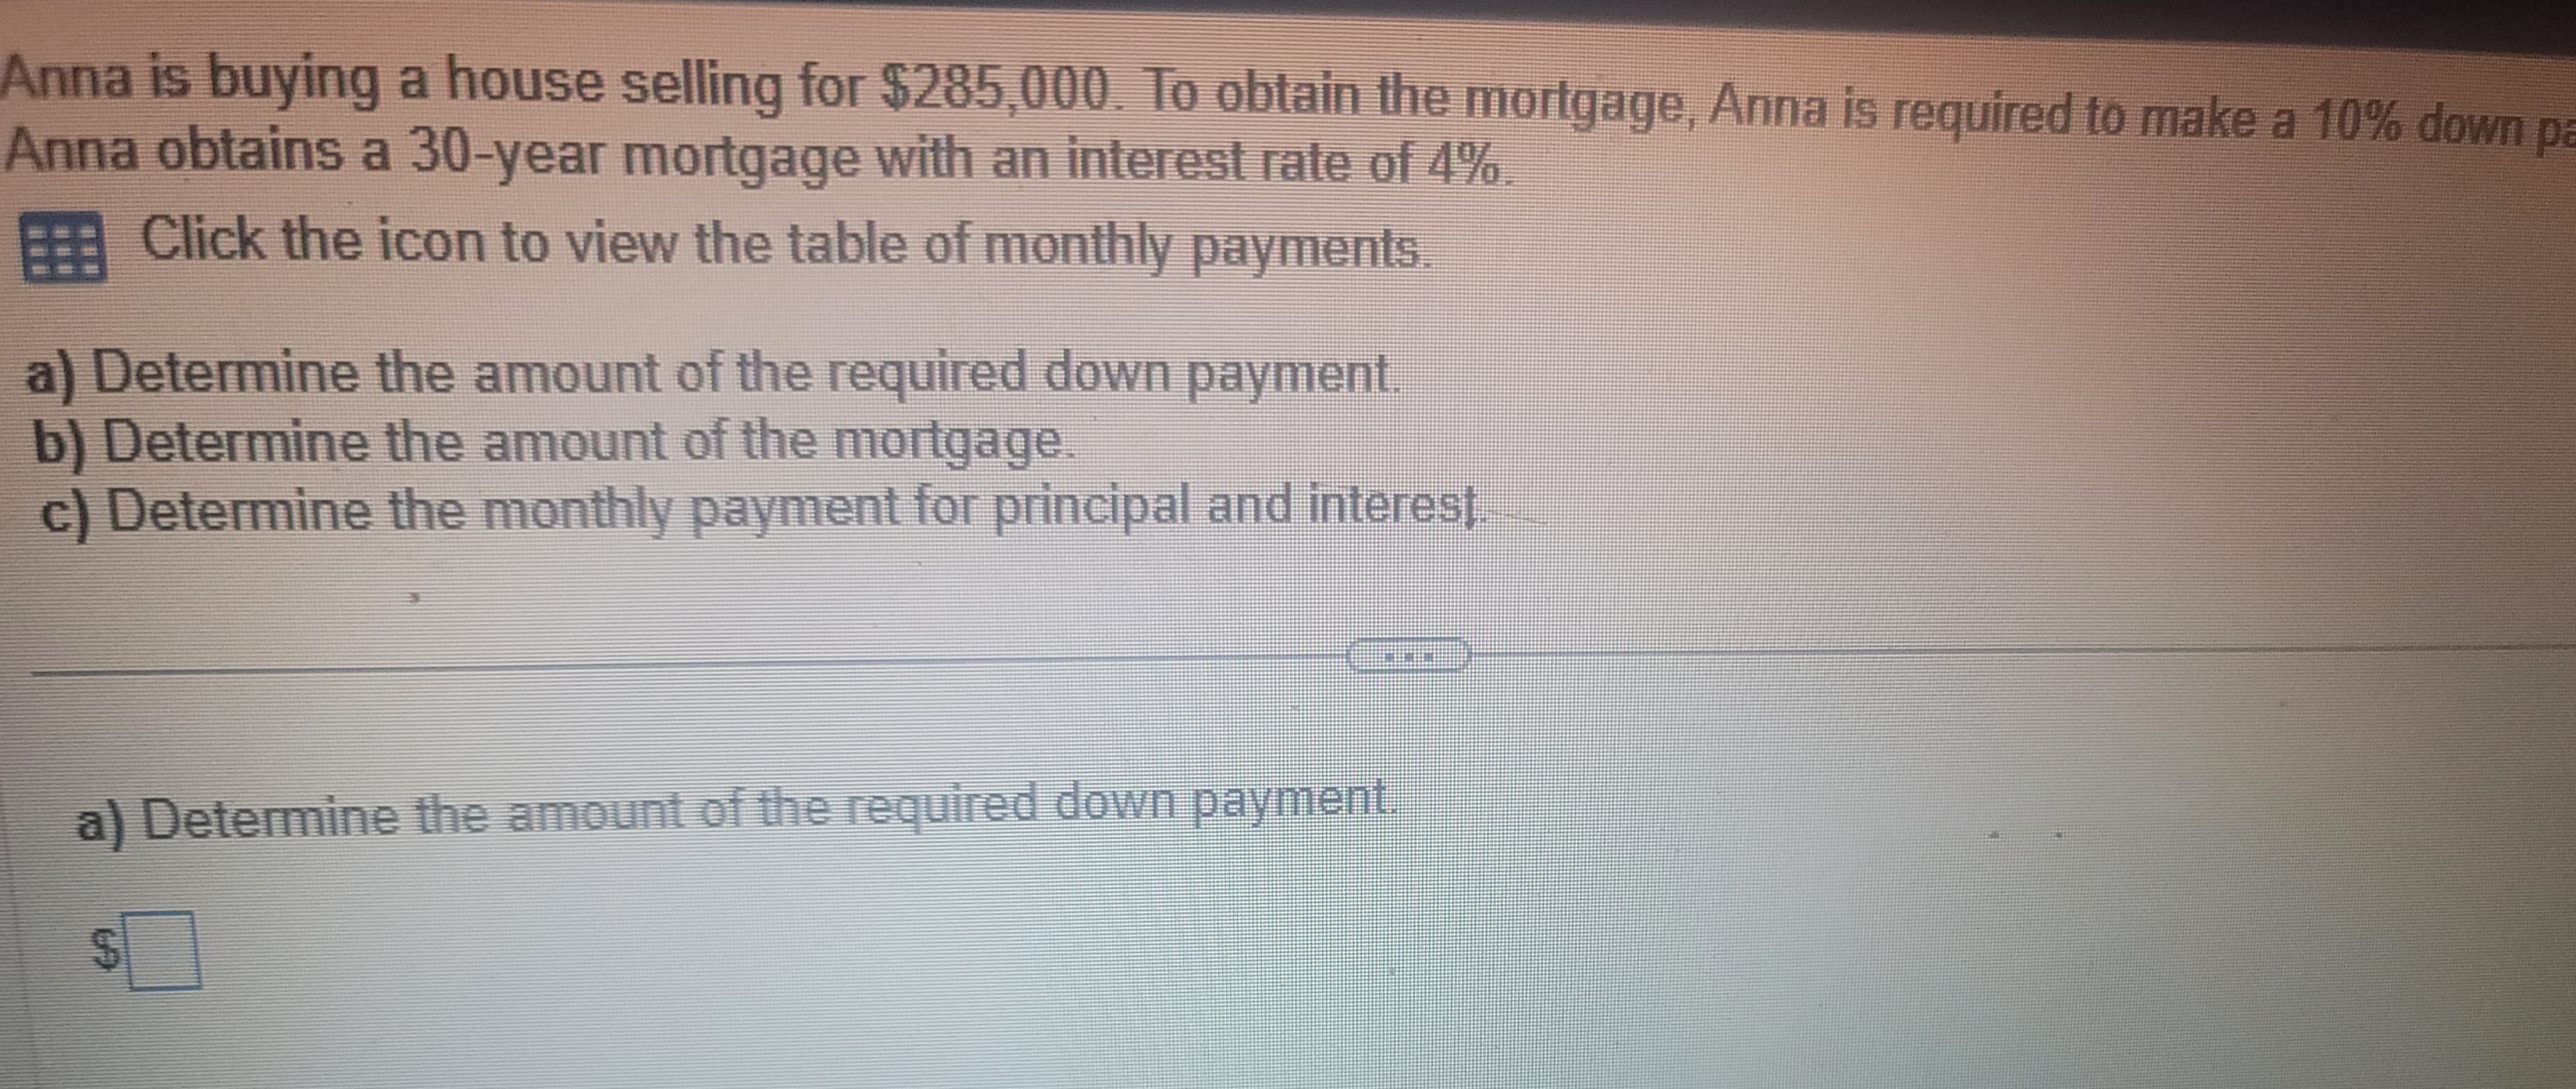 Anna is buying a house selling for $285,000. To obtain the mortgage, Anna is required to make a 10% down pa
Anna obtains a 30-year mortgage with an interest rate of 4%.
Click the icon to view the table of monthly payments.
a) Determine the amount of the required down payment
b) Determine the amount of the mortgage.
c) Determine the monthly payment for principal and interest.
a) Determine the amount of the required down payment.
CO